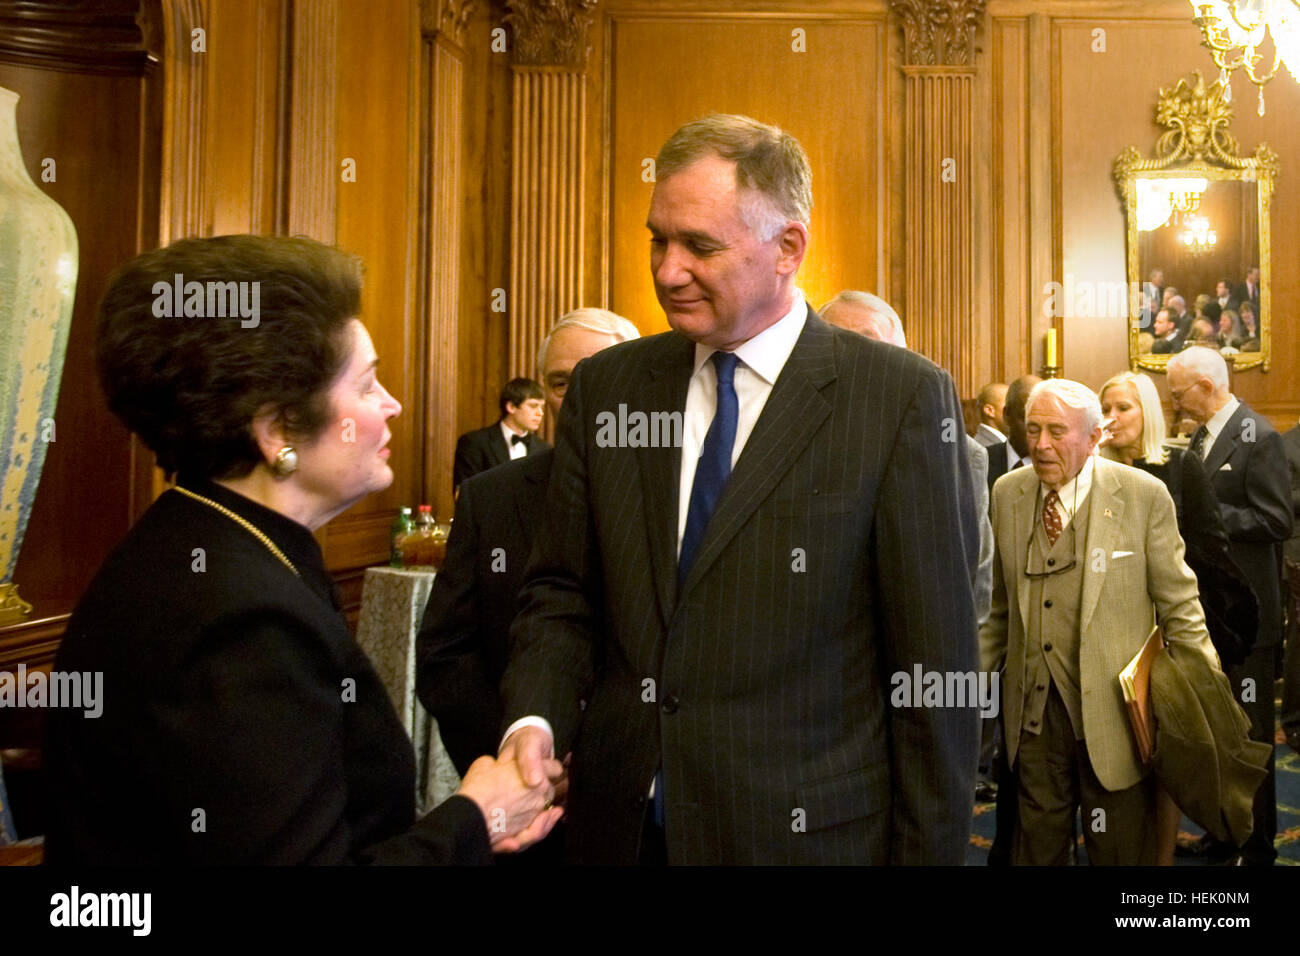 Deputy Defense Secretary William J. Lynn, III, shakes hands with Joyce Murtha, widow of U.S. Congressman John Murtha (D-Pa.), following a memorial service for Murtha at the U.S. Capitol in Washington D.C., March 3, 2010.  Murtha was an officer in the Marine Reserves in 1974 when he became the first Vietnam War combat veteran elected to Congress. He later became the Chairman of the House Appropriations Subcommittee on Defense and an advocate for veterans affairs on Capitol Hill.  Army photo by D. Myles Cullen (released) Defense.gov photo essay 100303-A-0193C-012 Stock Photo